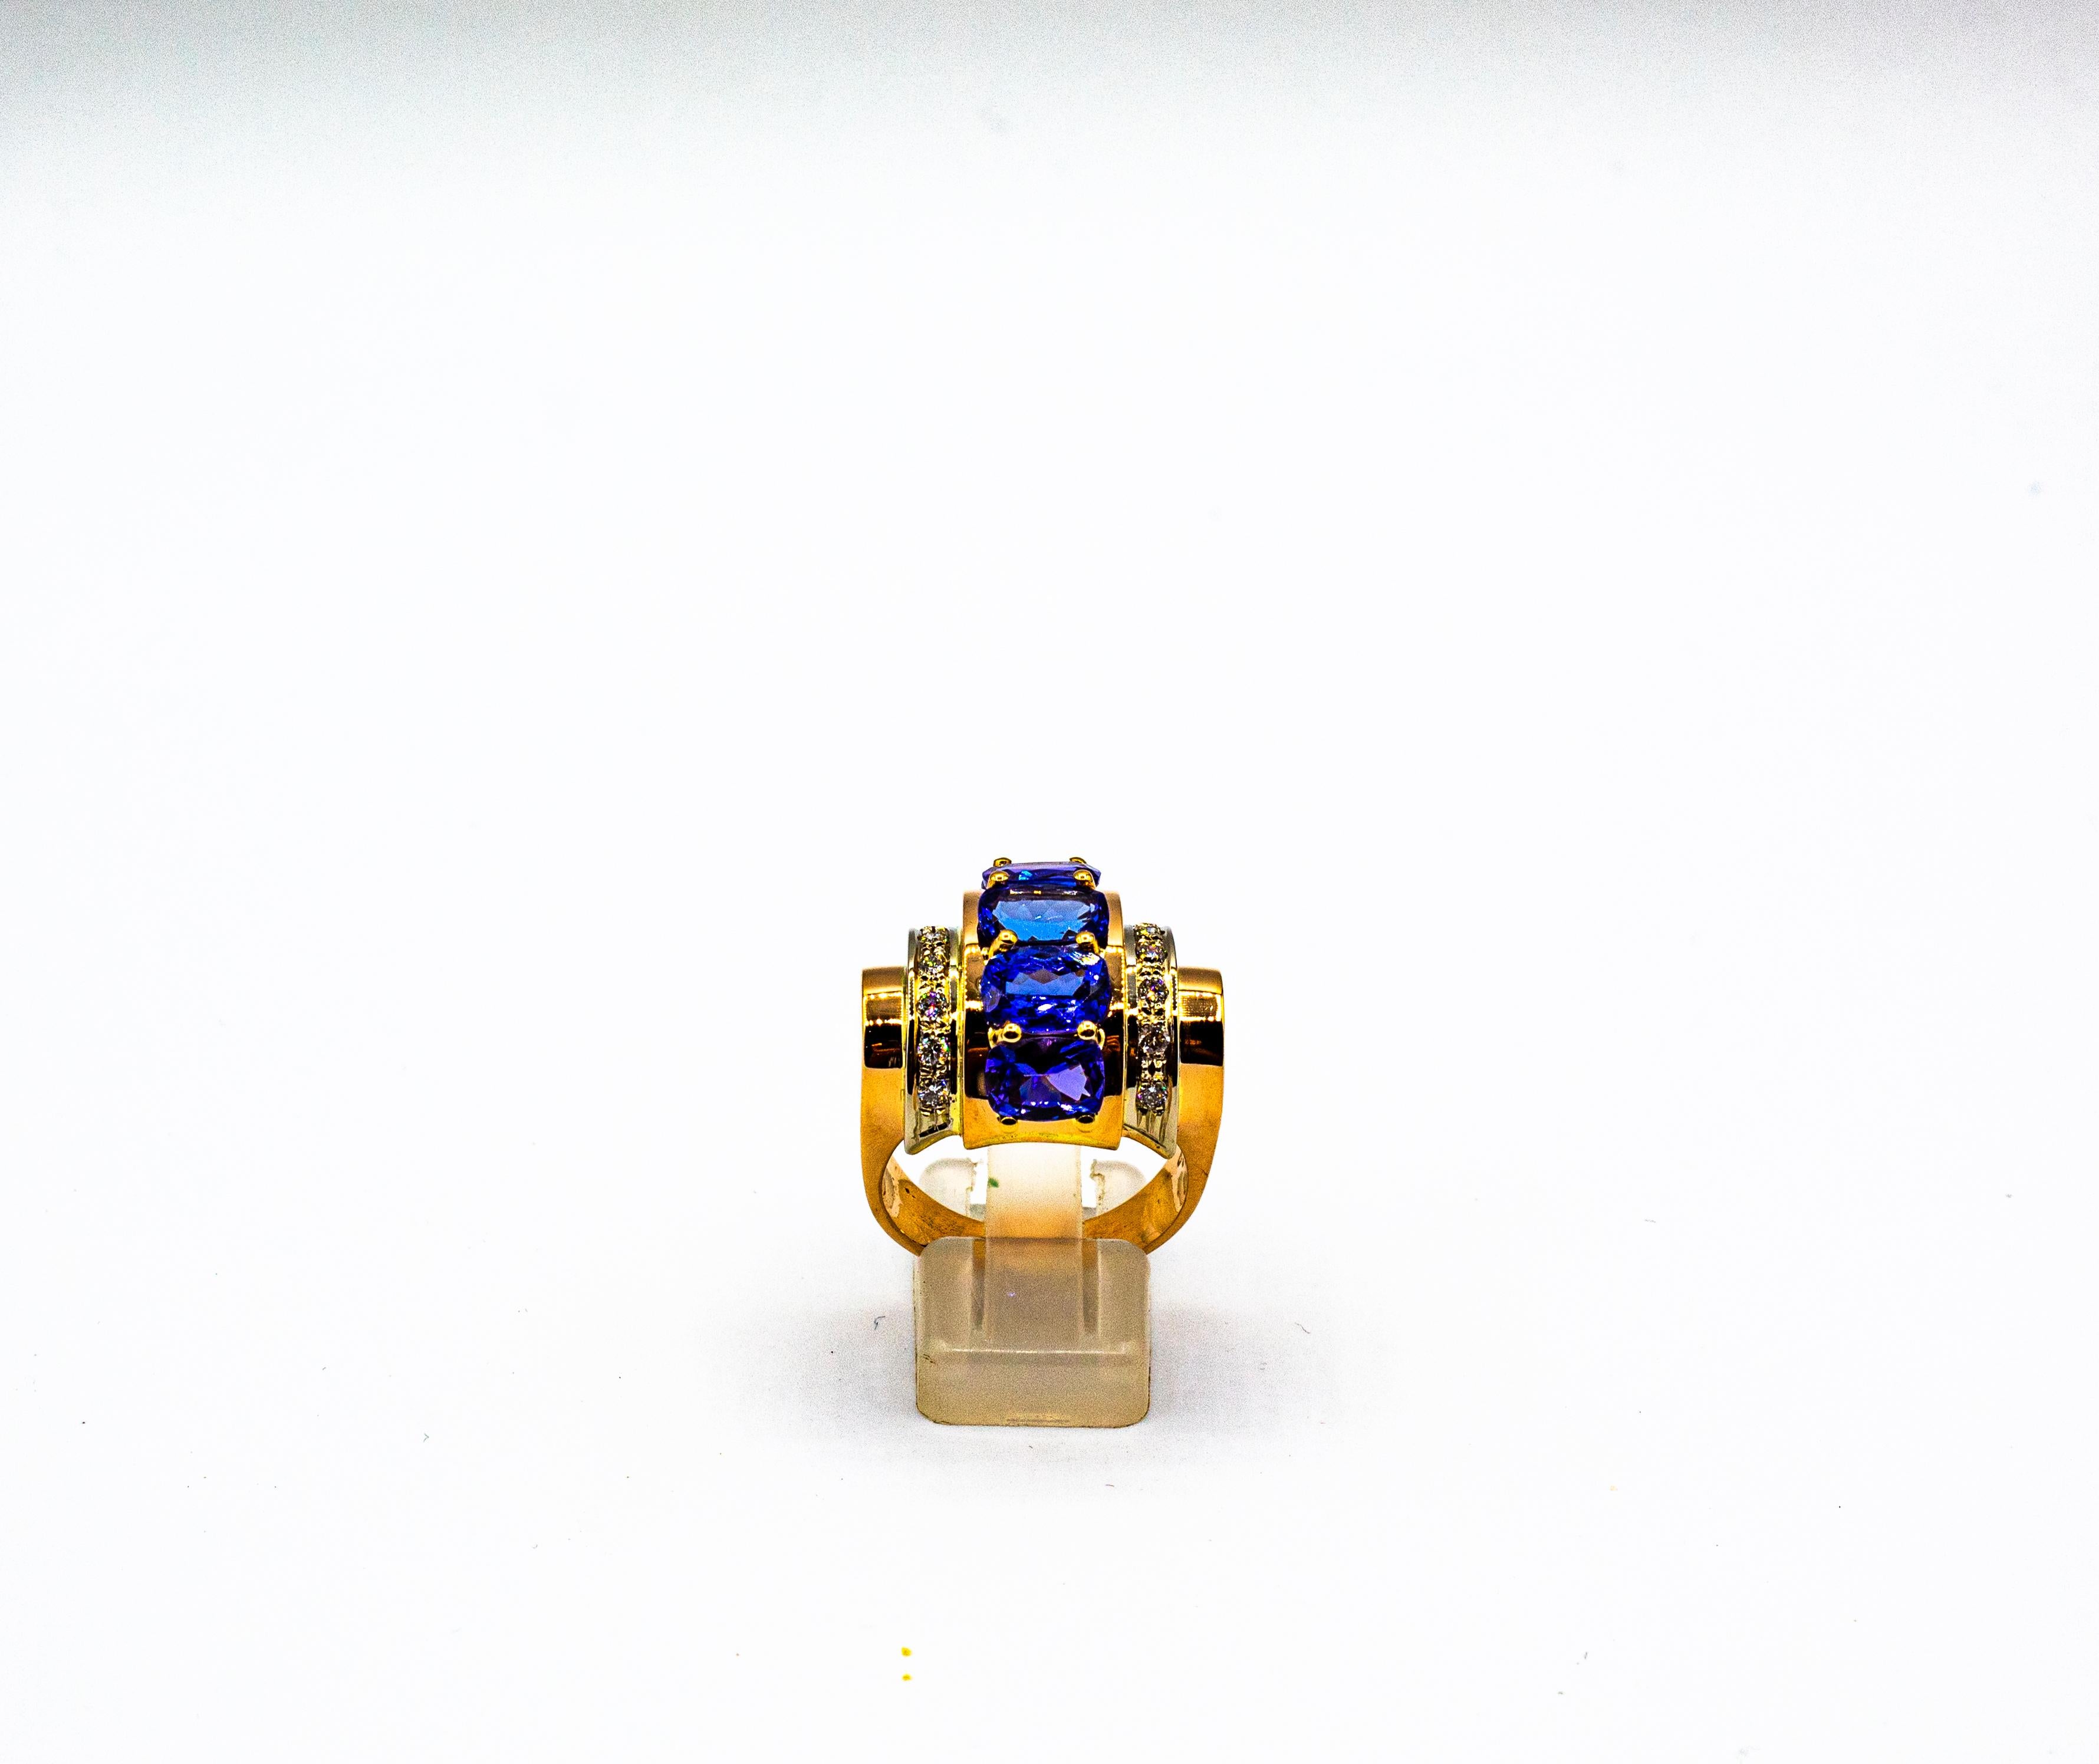 This Ring is made of 14K Yellow Gold.
This Ring has 0.30 Carats of White Brilliant Cut Diamonds.
This Ring has 5.68 Carats of Natural Cushion Cut Tanzanites.
This Ring is available also with Rubies, Emeralds or Blue Sapphires.

Size ITA: 19 USA: 8